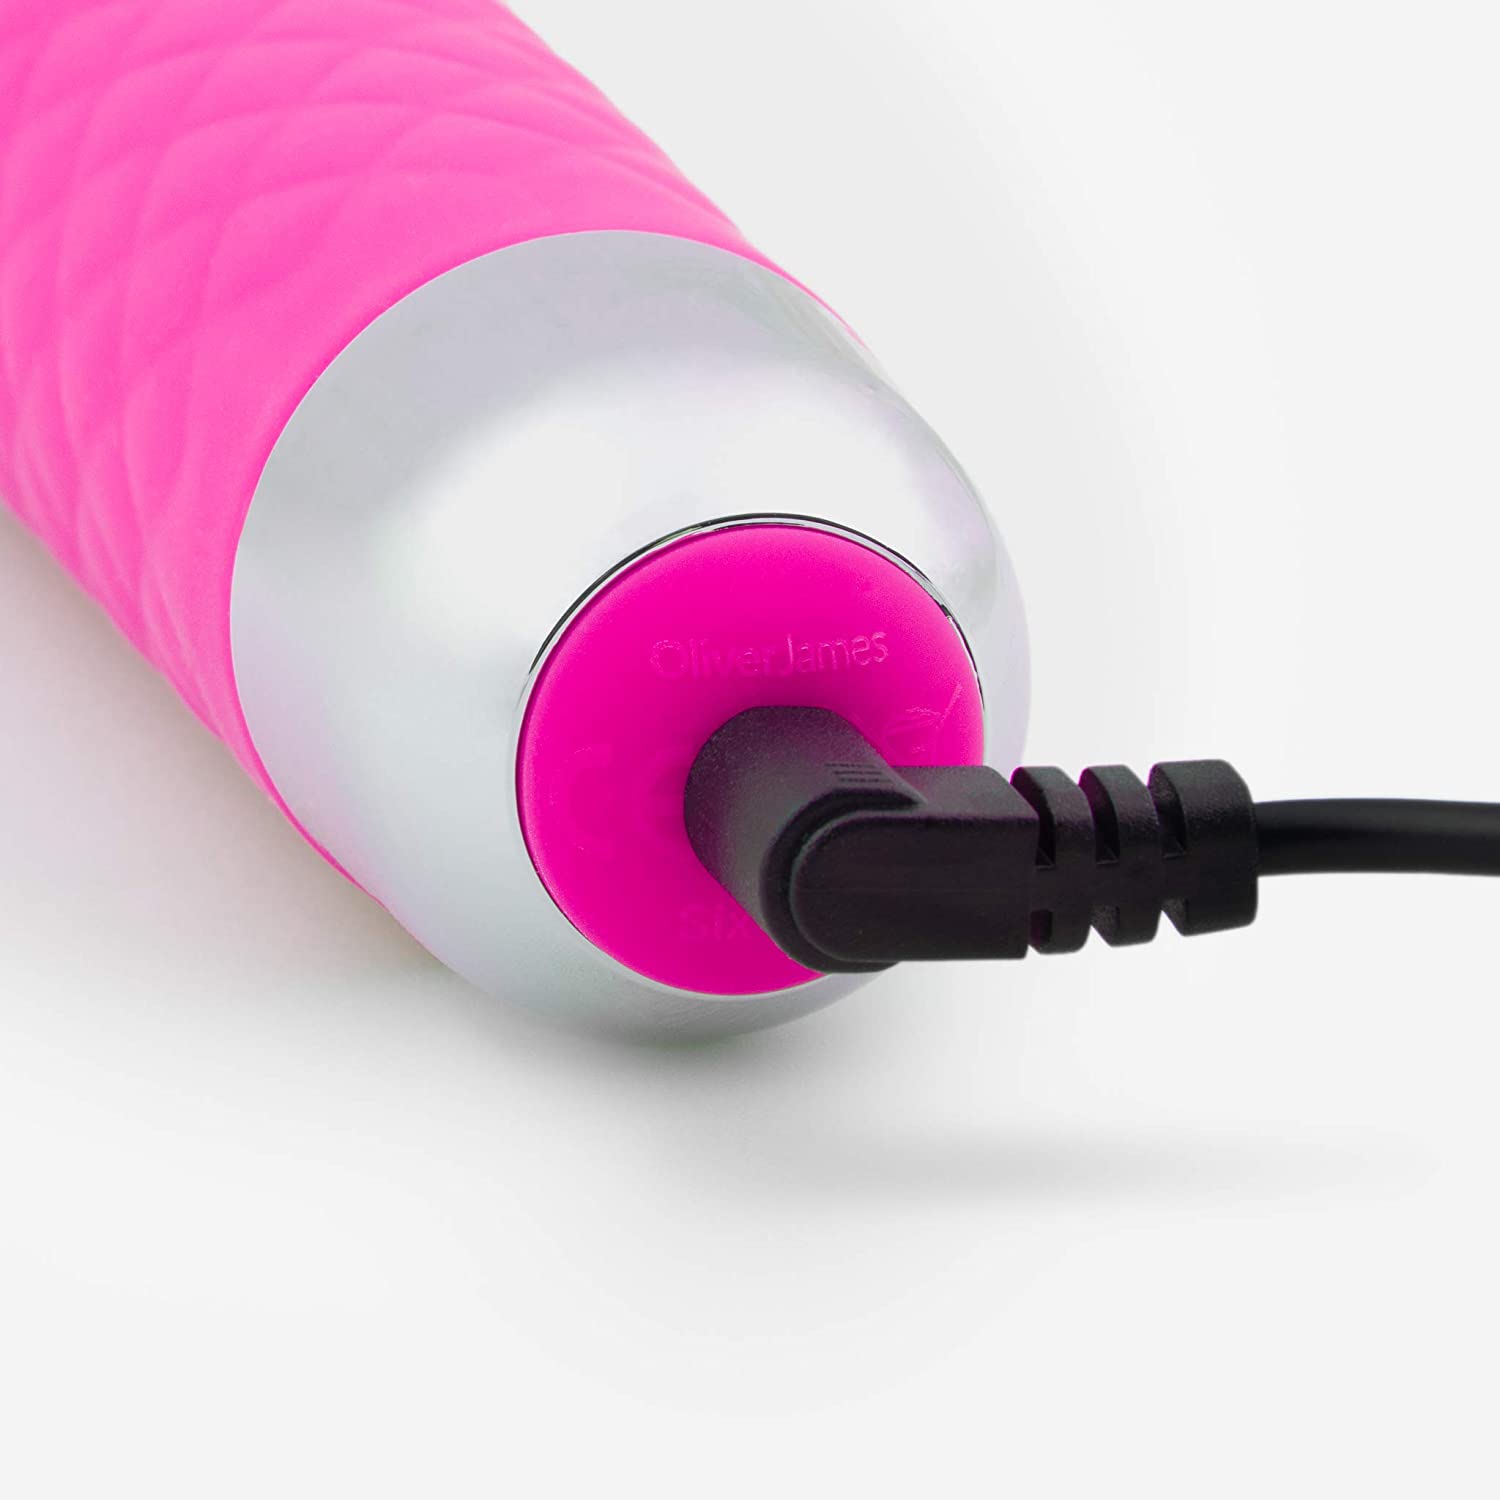 Replacement Charging Cable For Travel-Size Wand Massagers